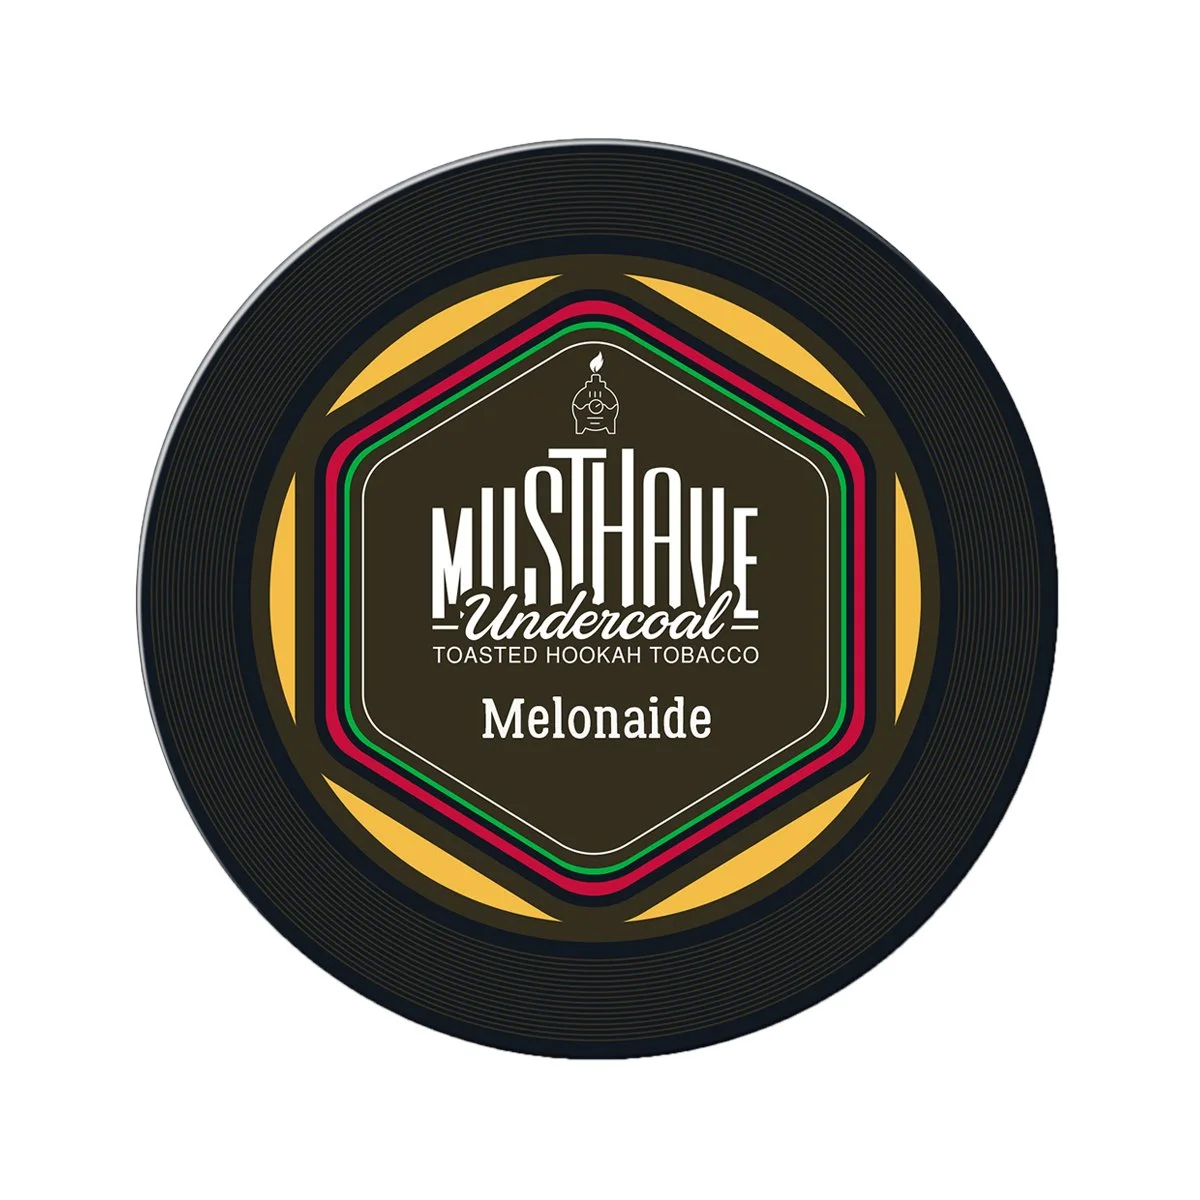 Musthave | Melonaide | 25g